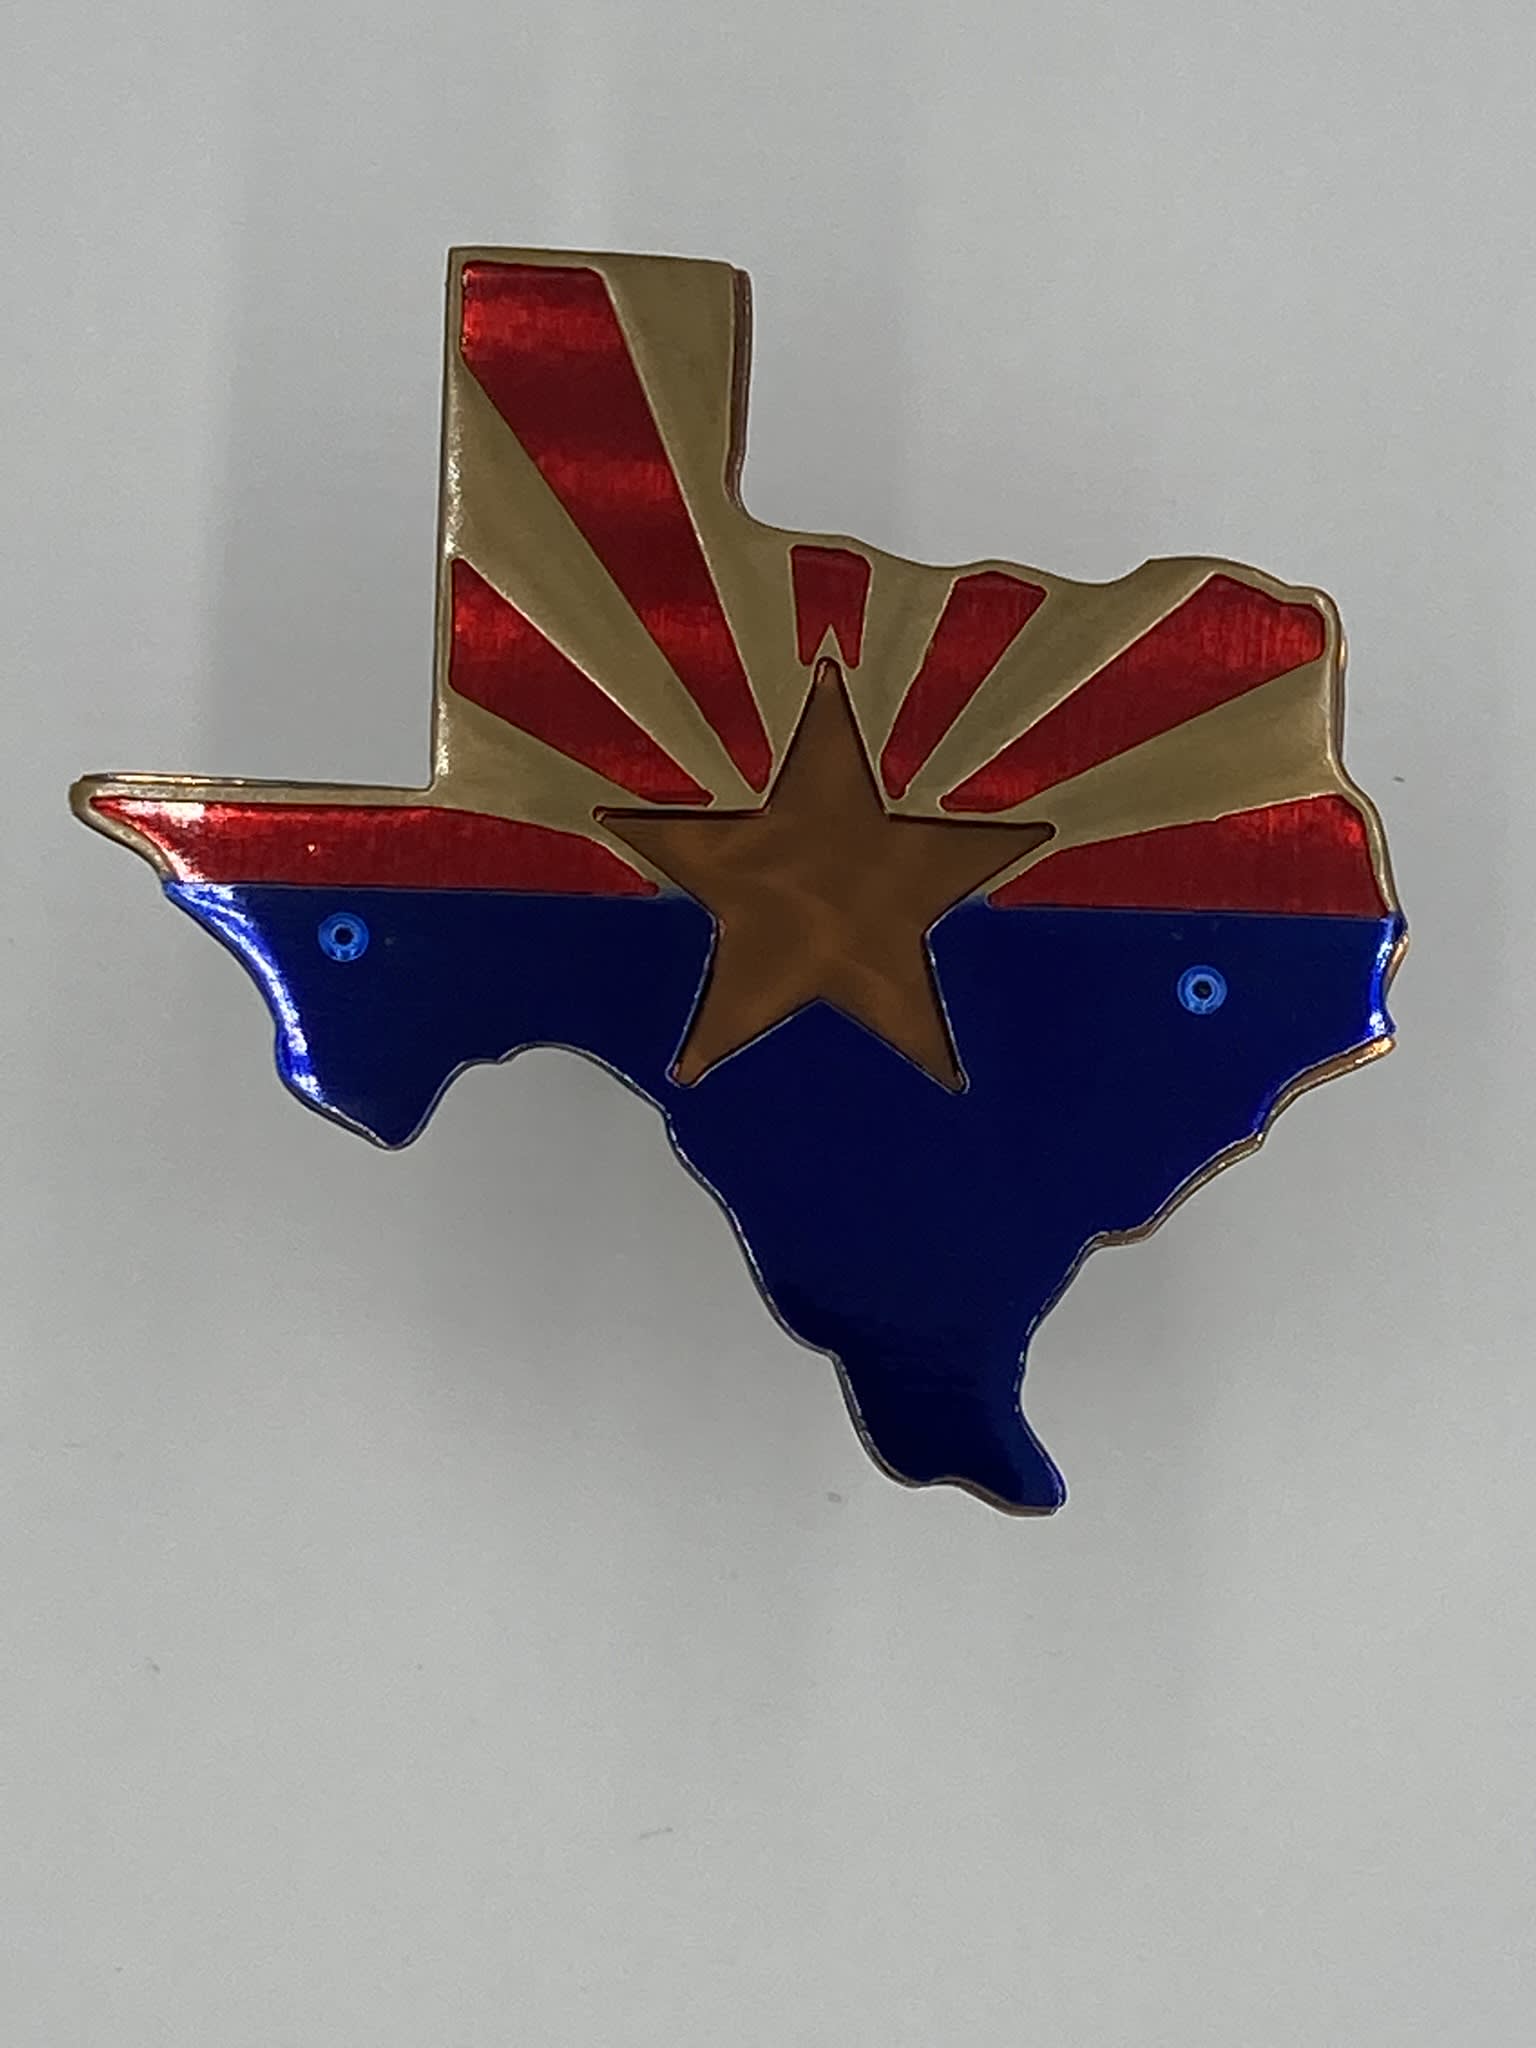 AZ in Texas - Receiver Hitch Covers - Mad Taco Metal - Metal